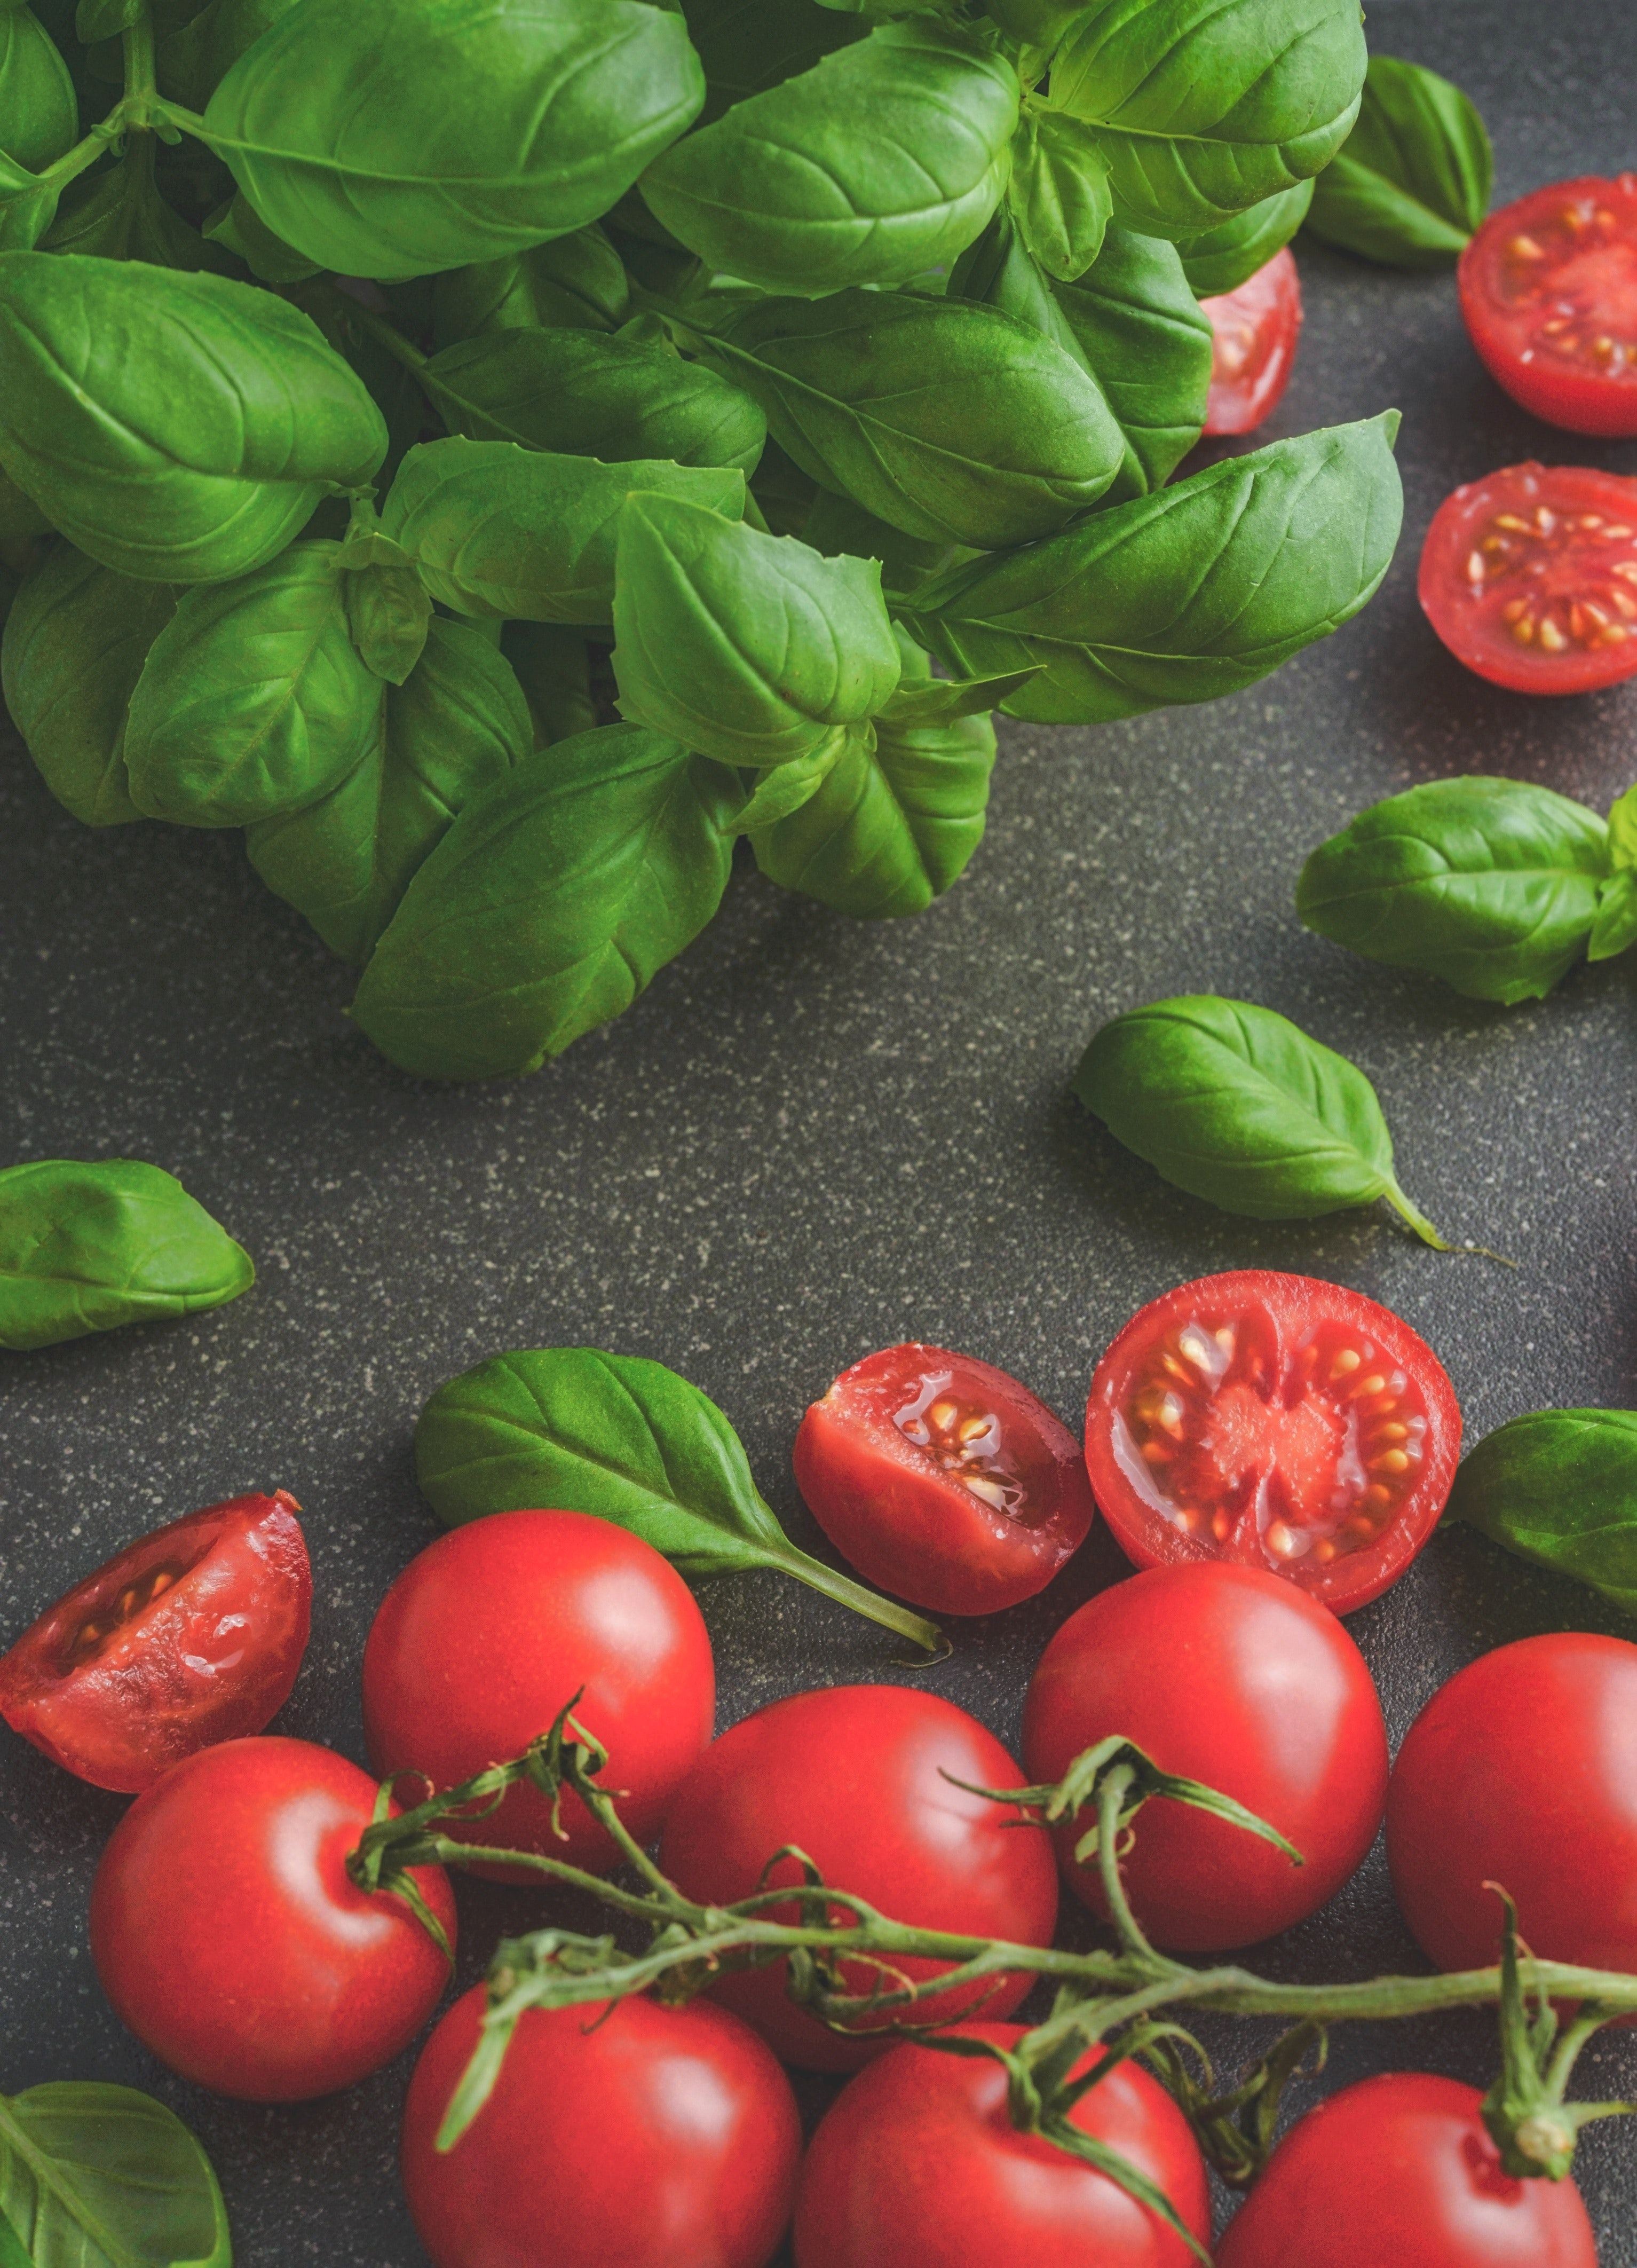 Photography of Tomatoes Near Basil Leaves · Free